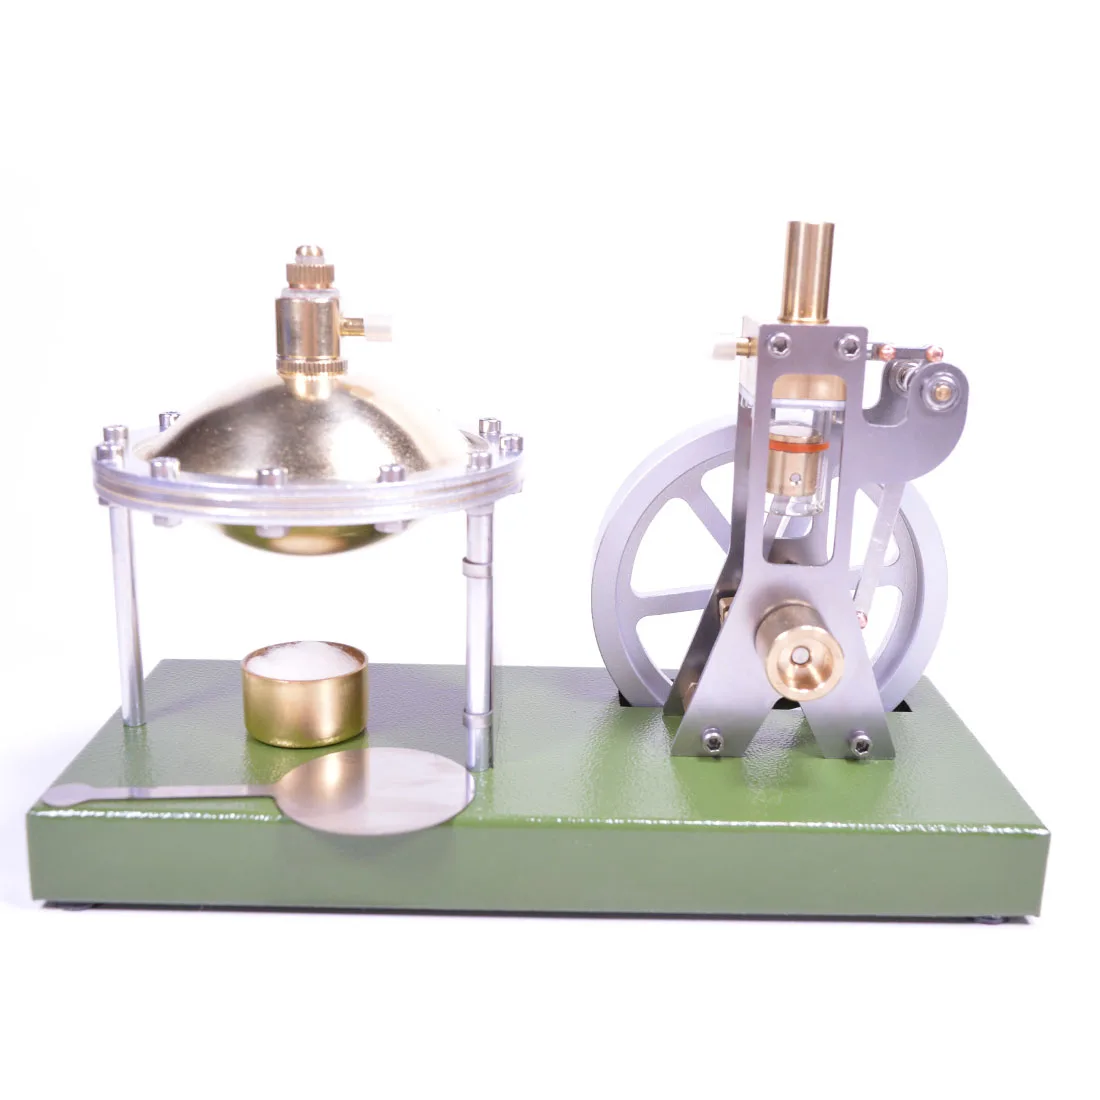 

Retro Metal Simulation Vertical Transparent Cylinder Steam Engine Model Physics Science Experiment Toy With Boiler For Children